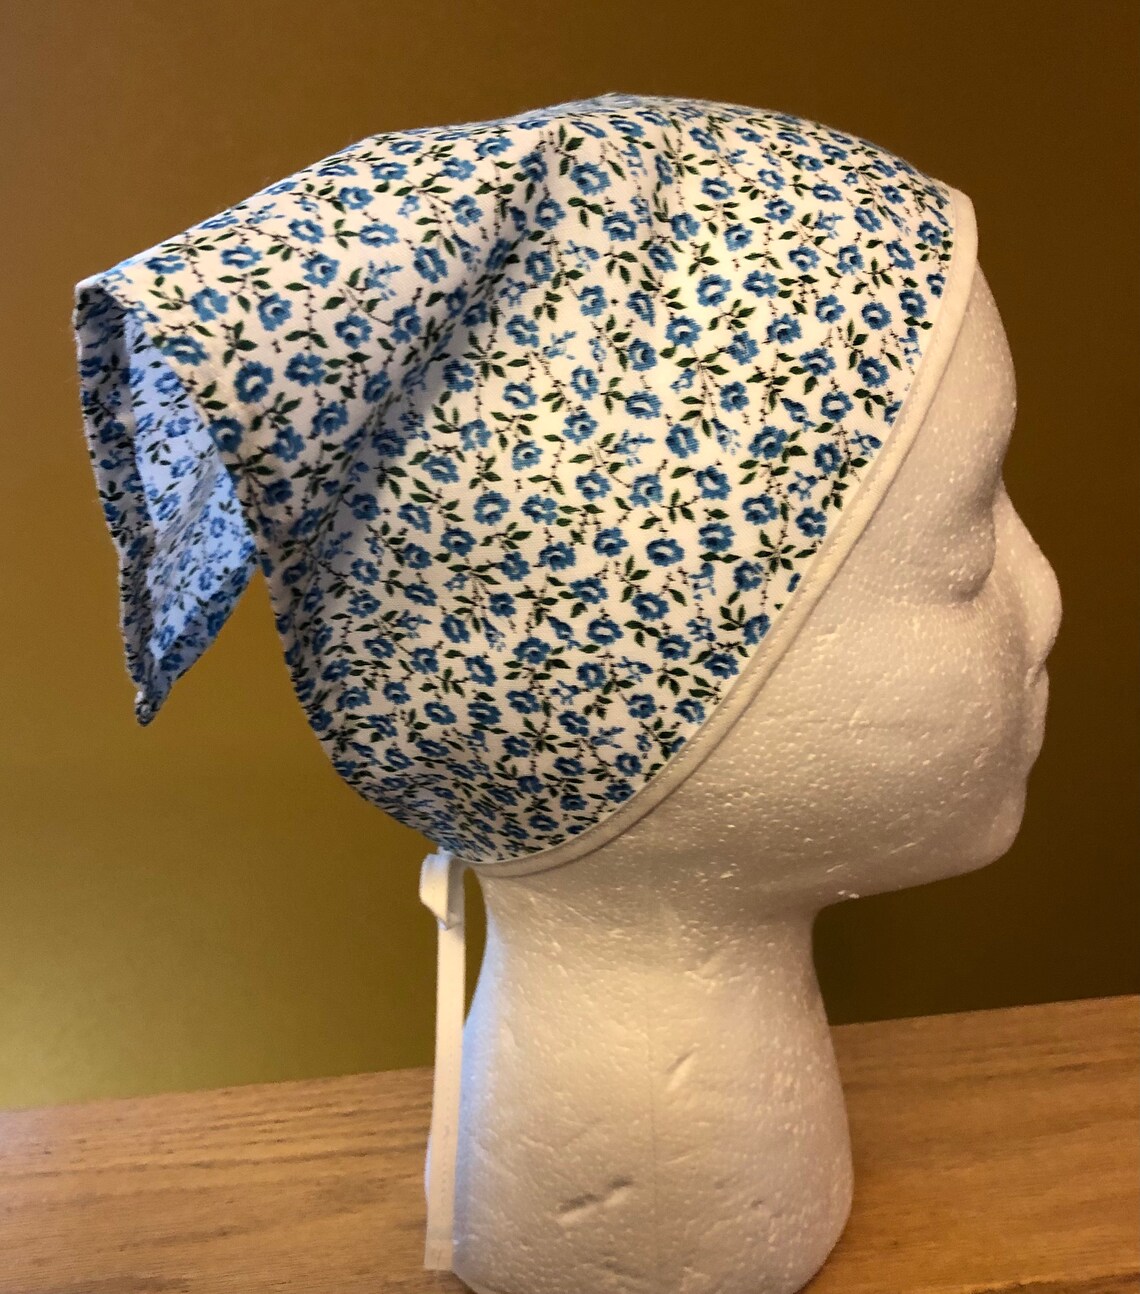 Head Kerchief with Ties Pretty Blue Floral on White | Etsy